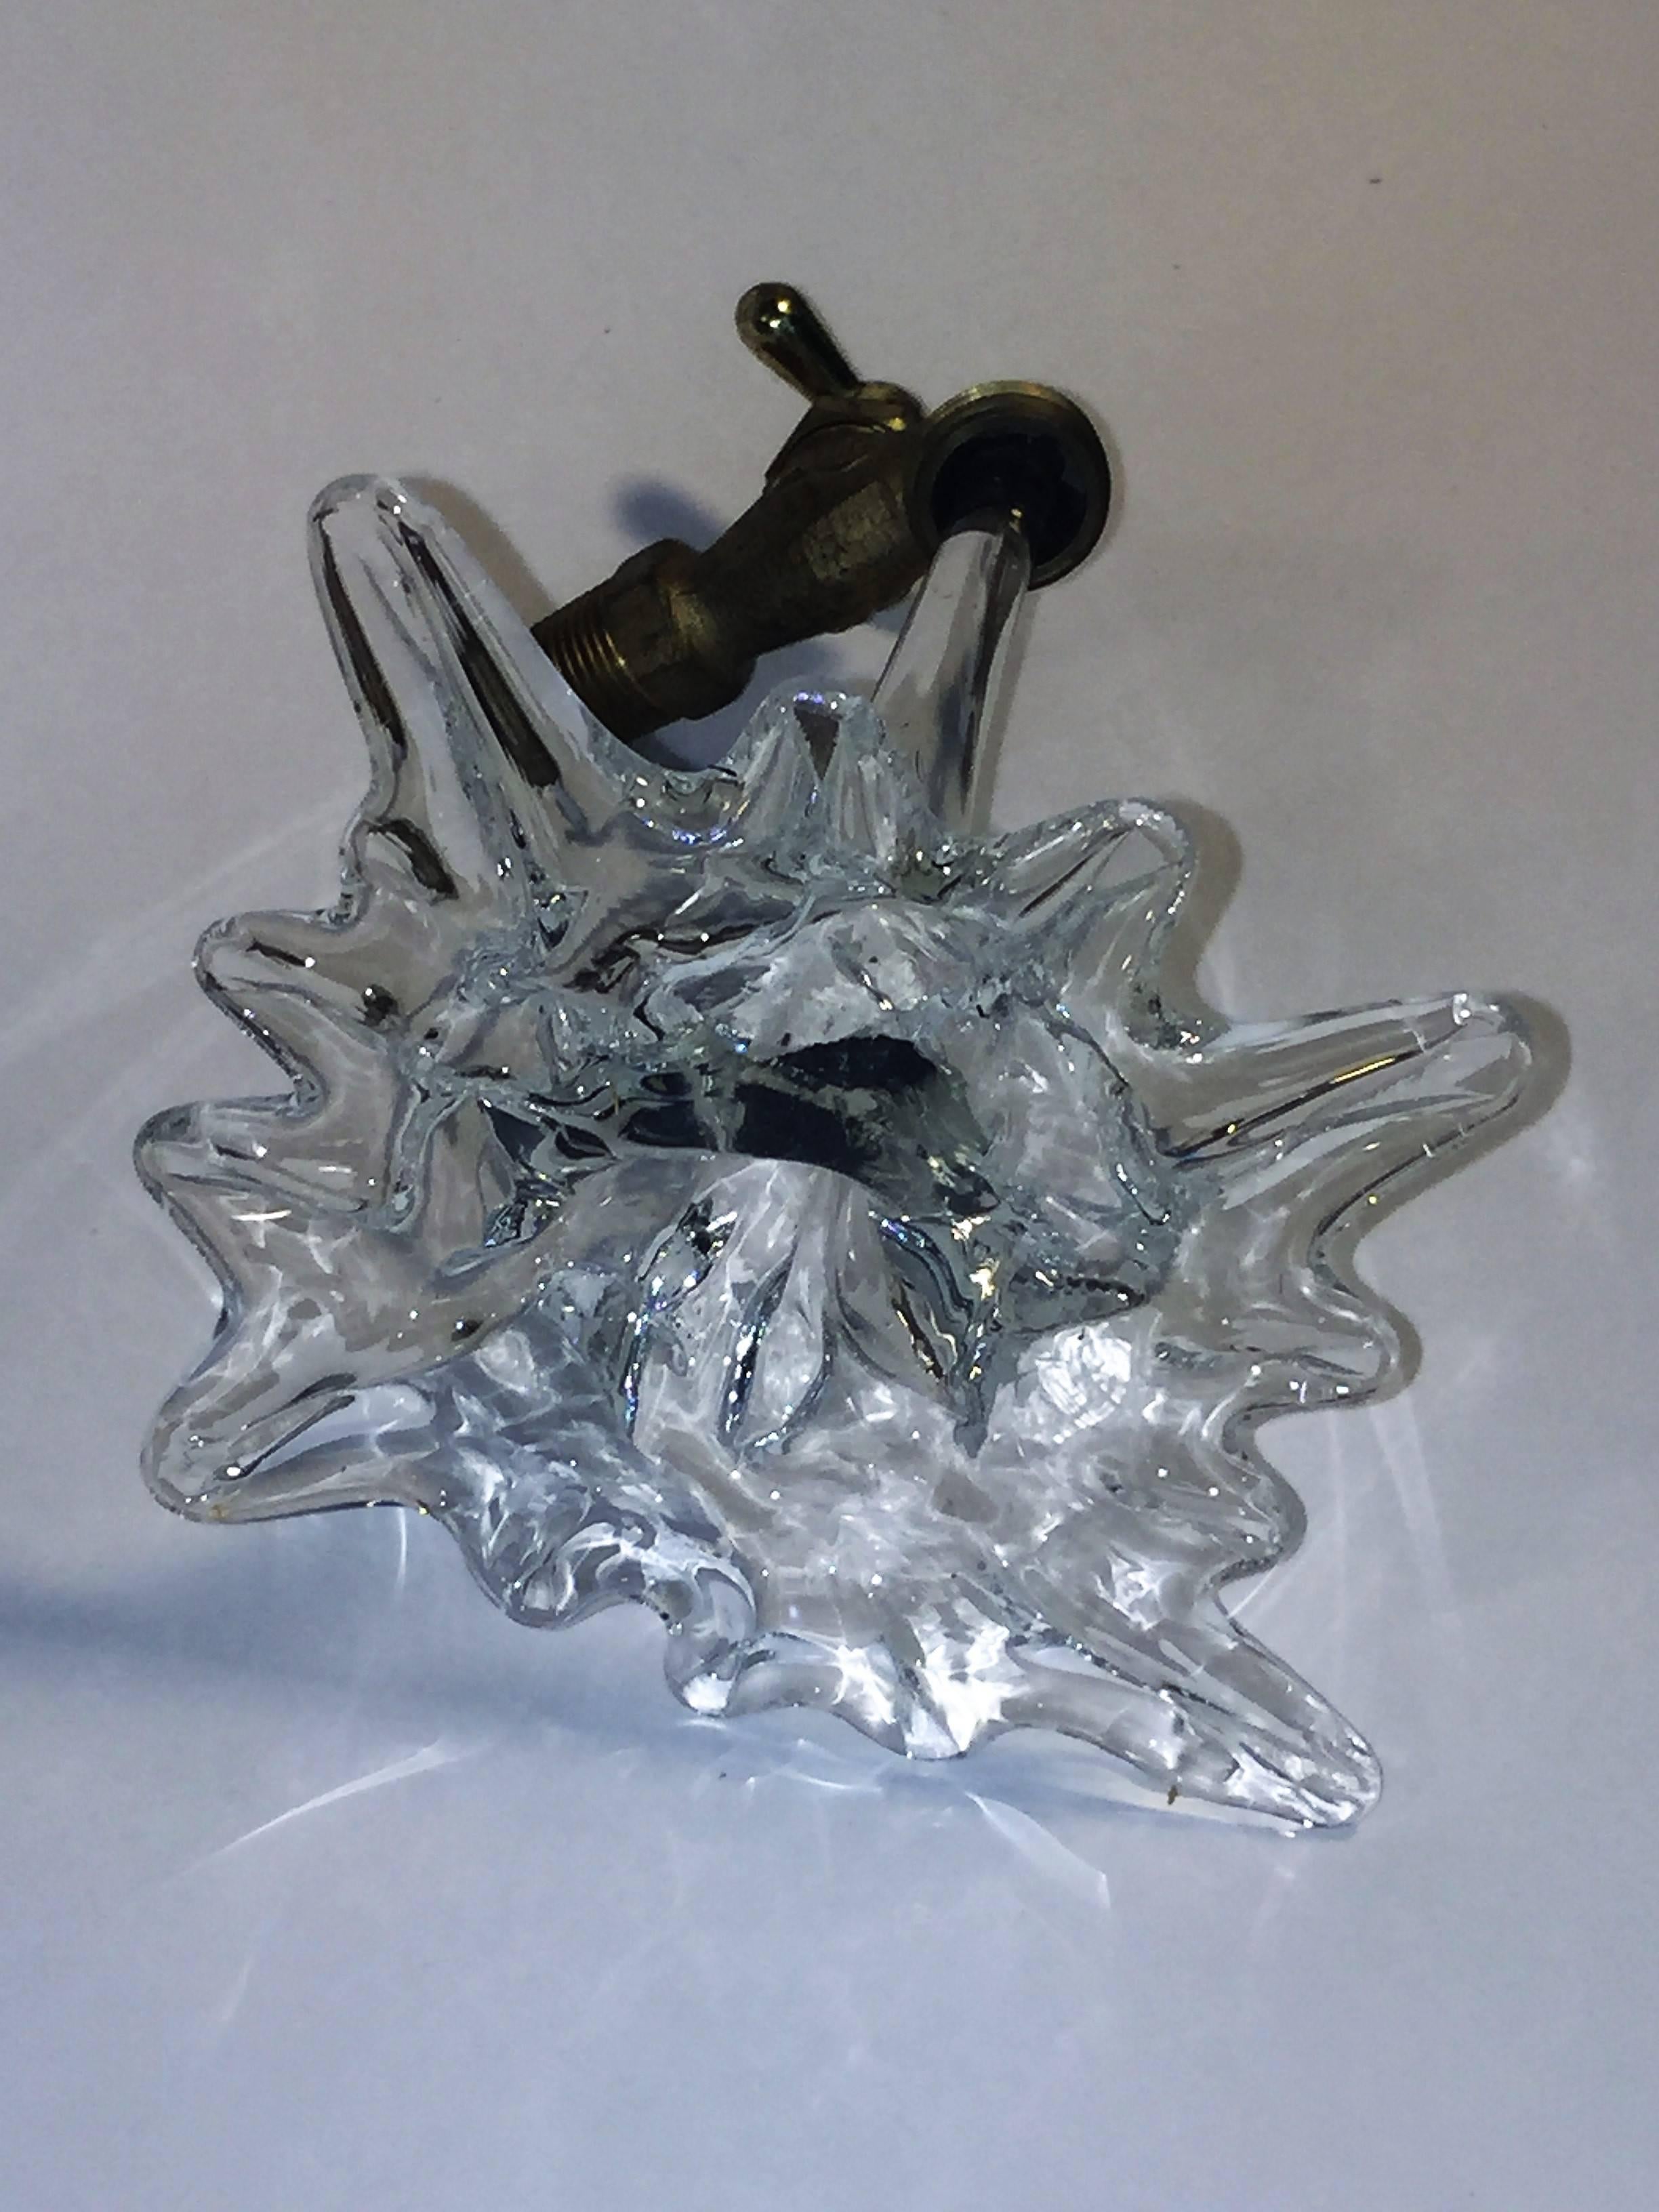 Illusory Italian Brass Faucet Flowing Water Glass Sculpture In Excellent Condition For Sale In Mount Penn, PA